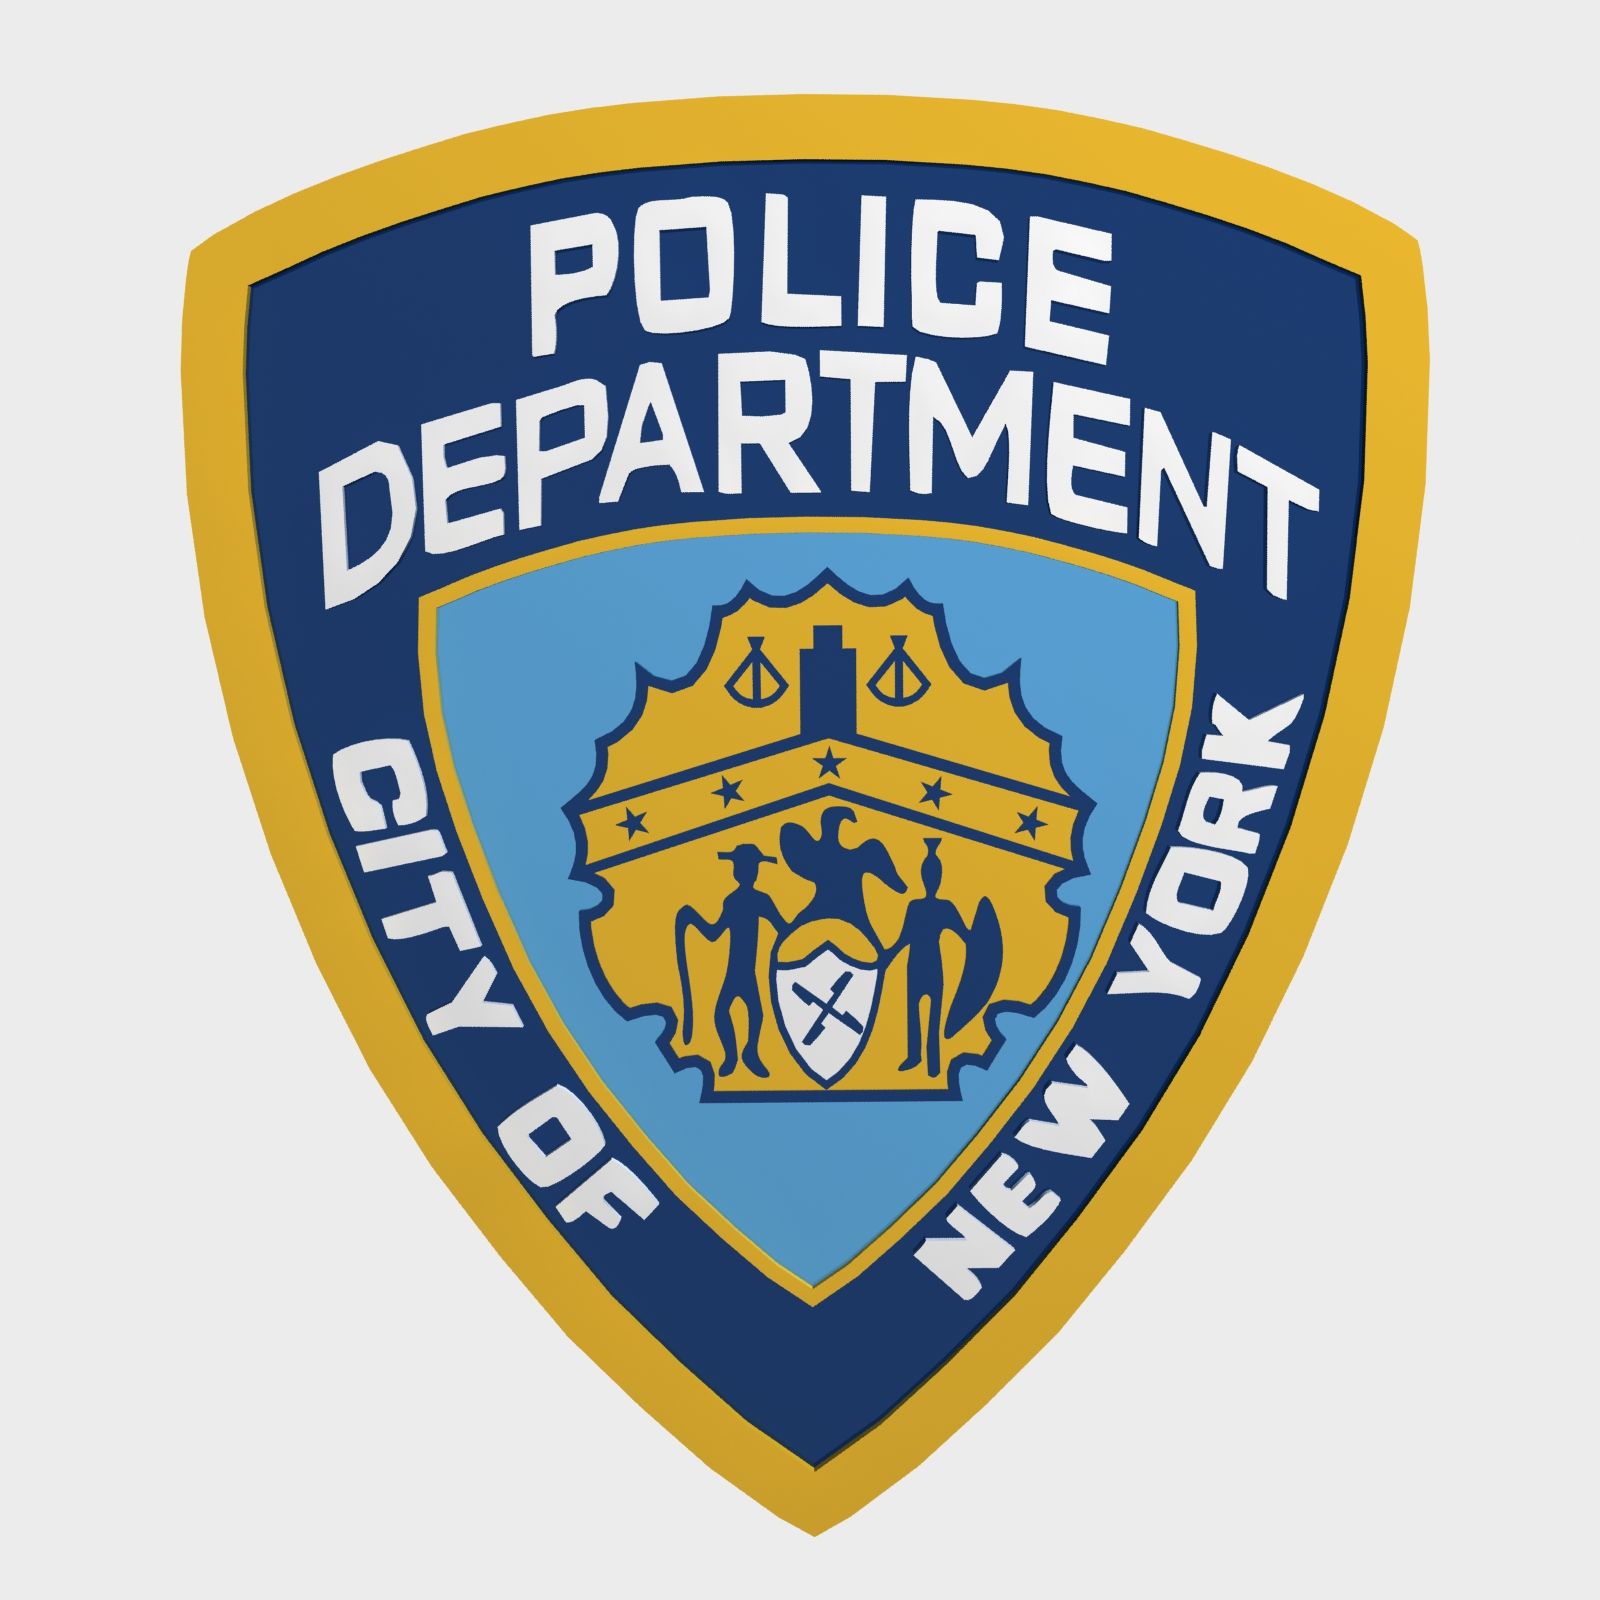 NYPD Police Department logo. Police, New york police, Police department